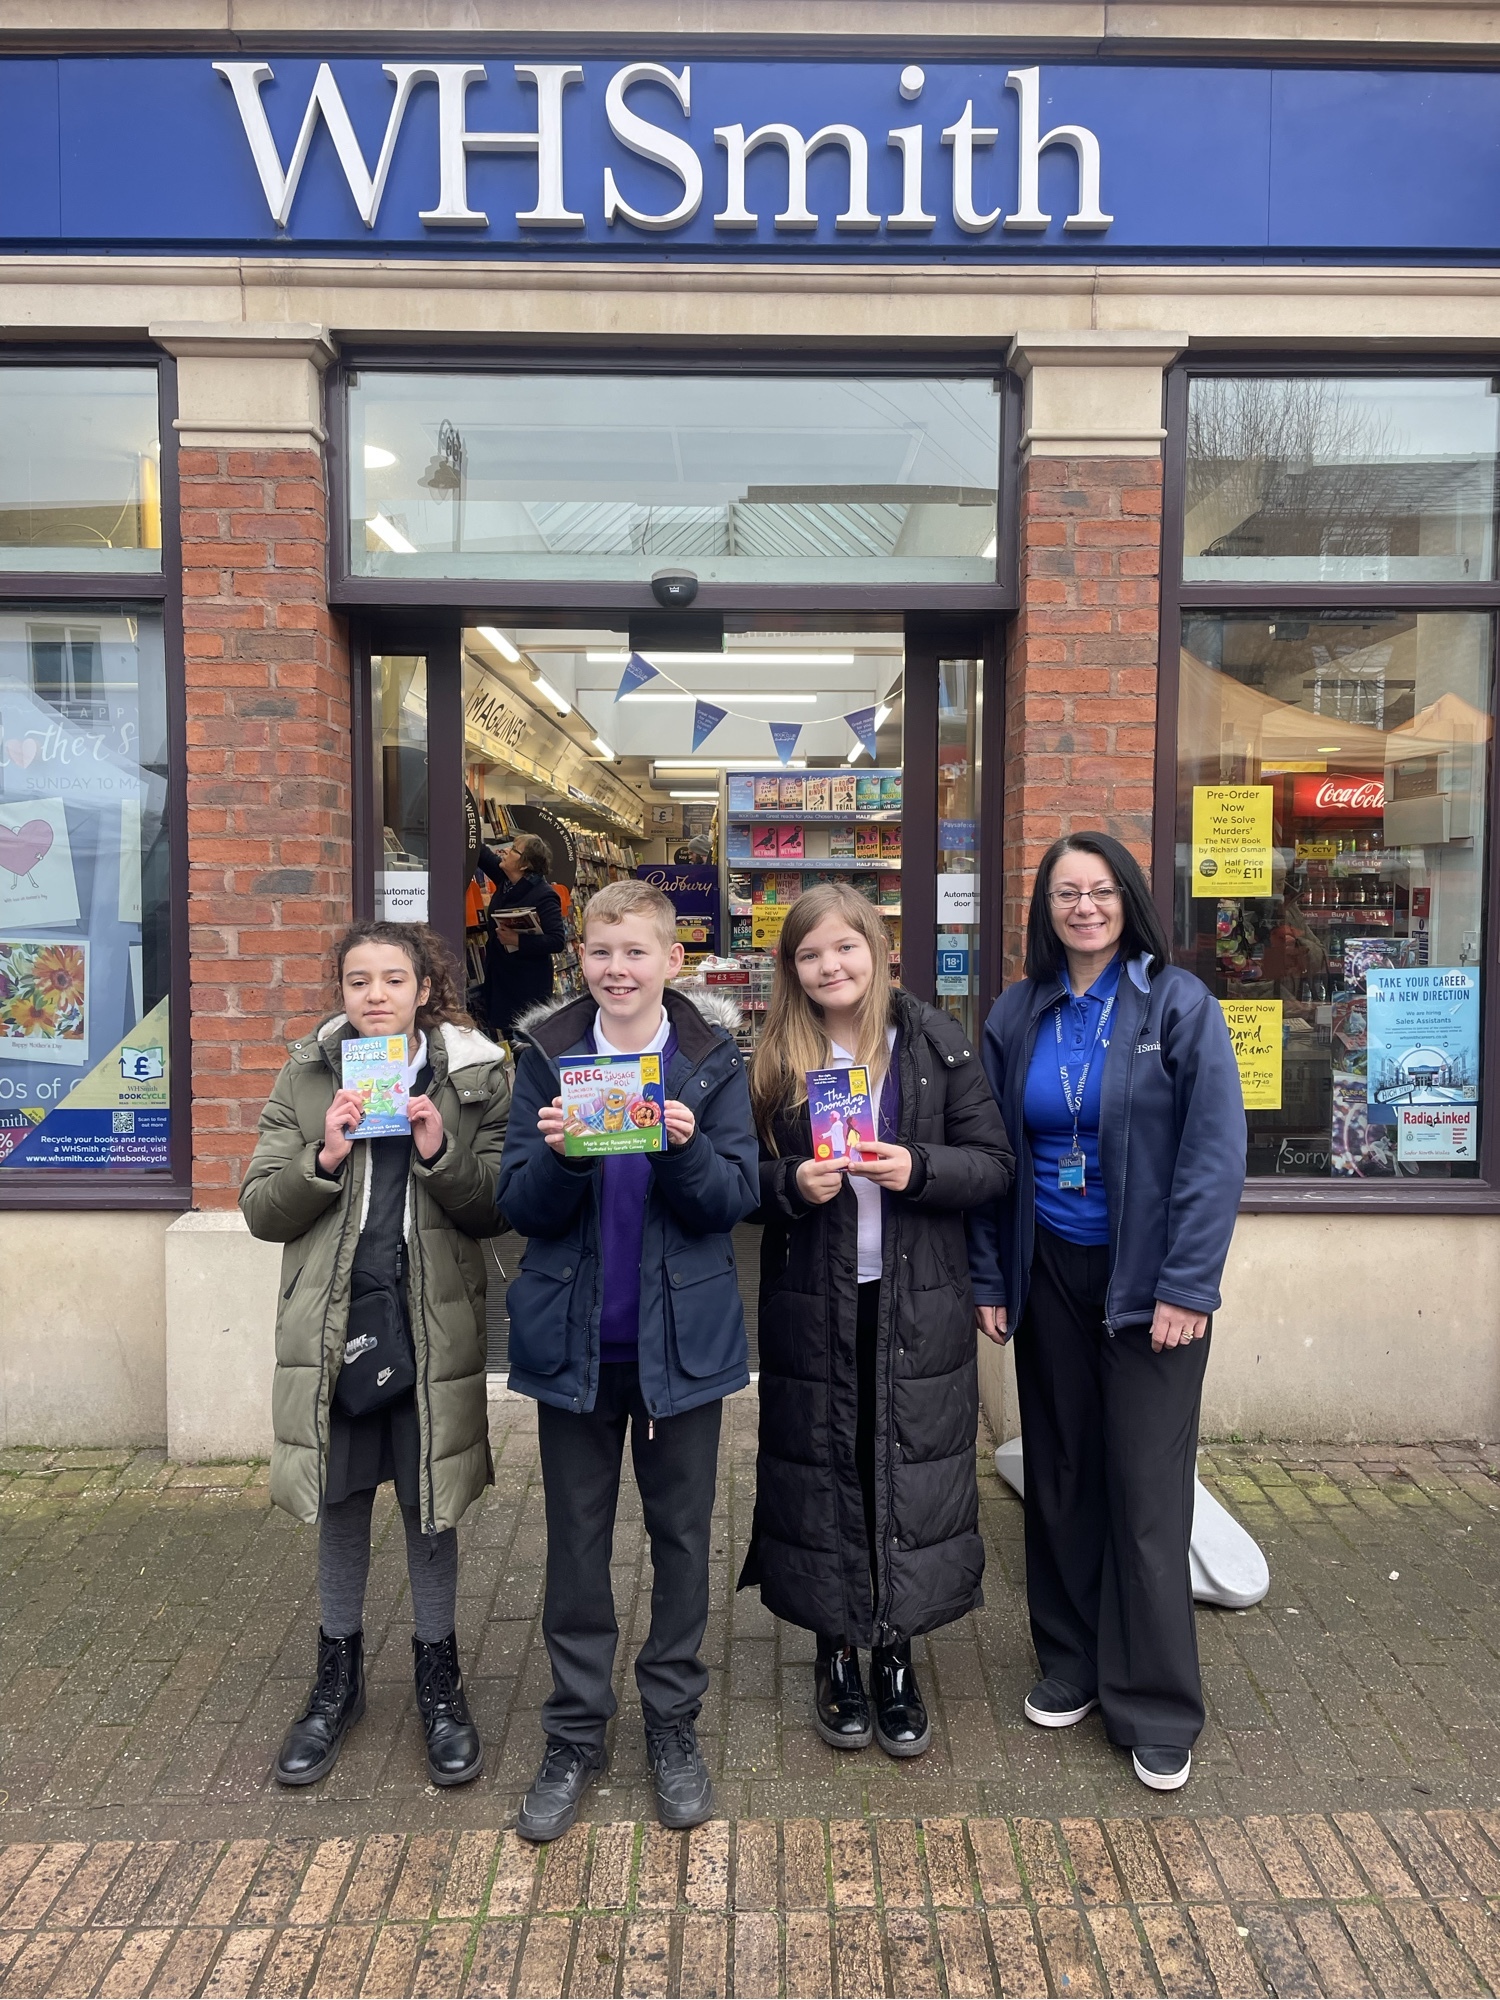 Broughton Primary School Reading Champions at the Mold WH Smith store with staff member Joanne Latham.